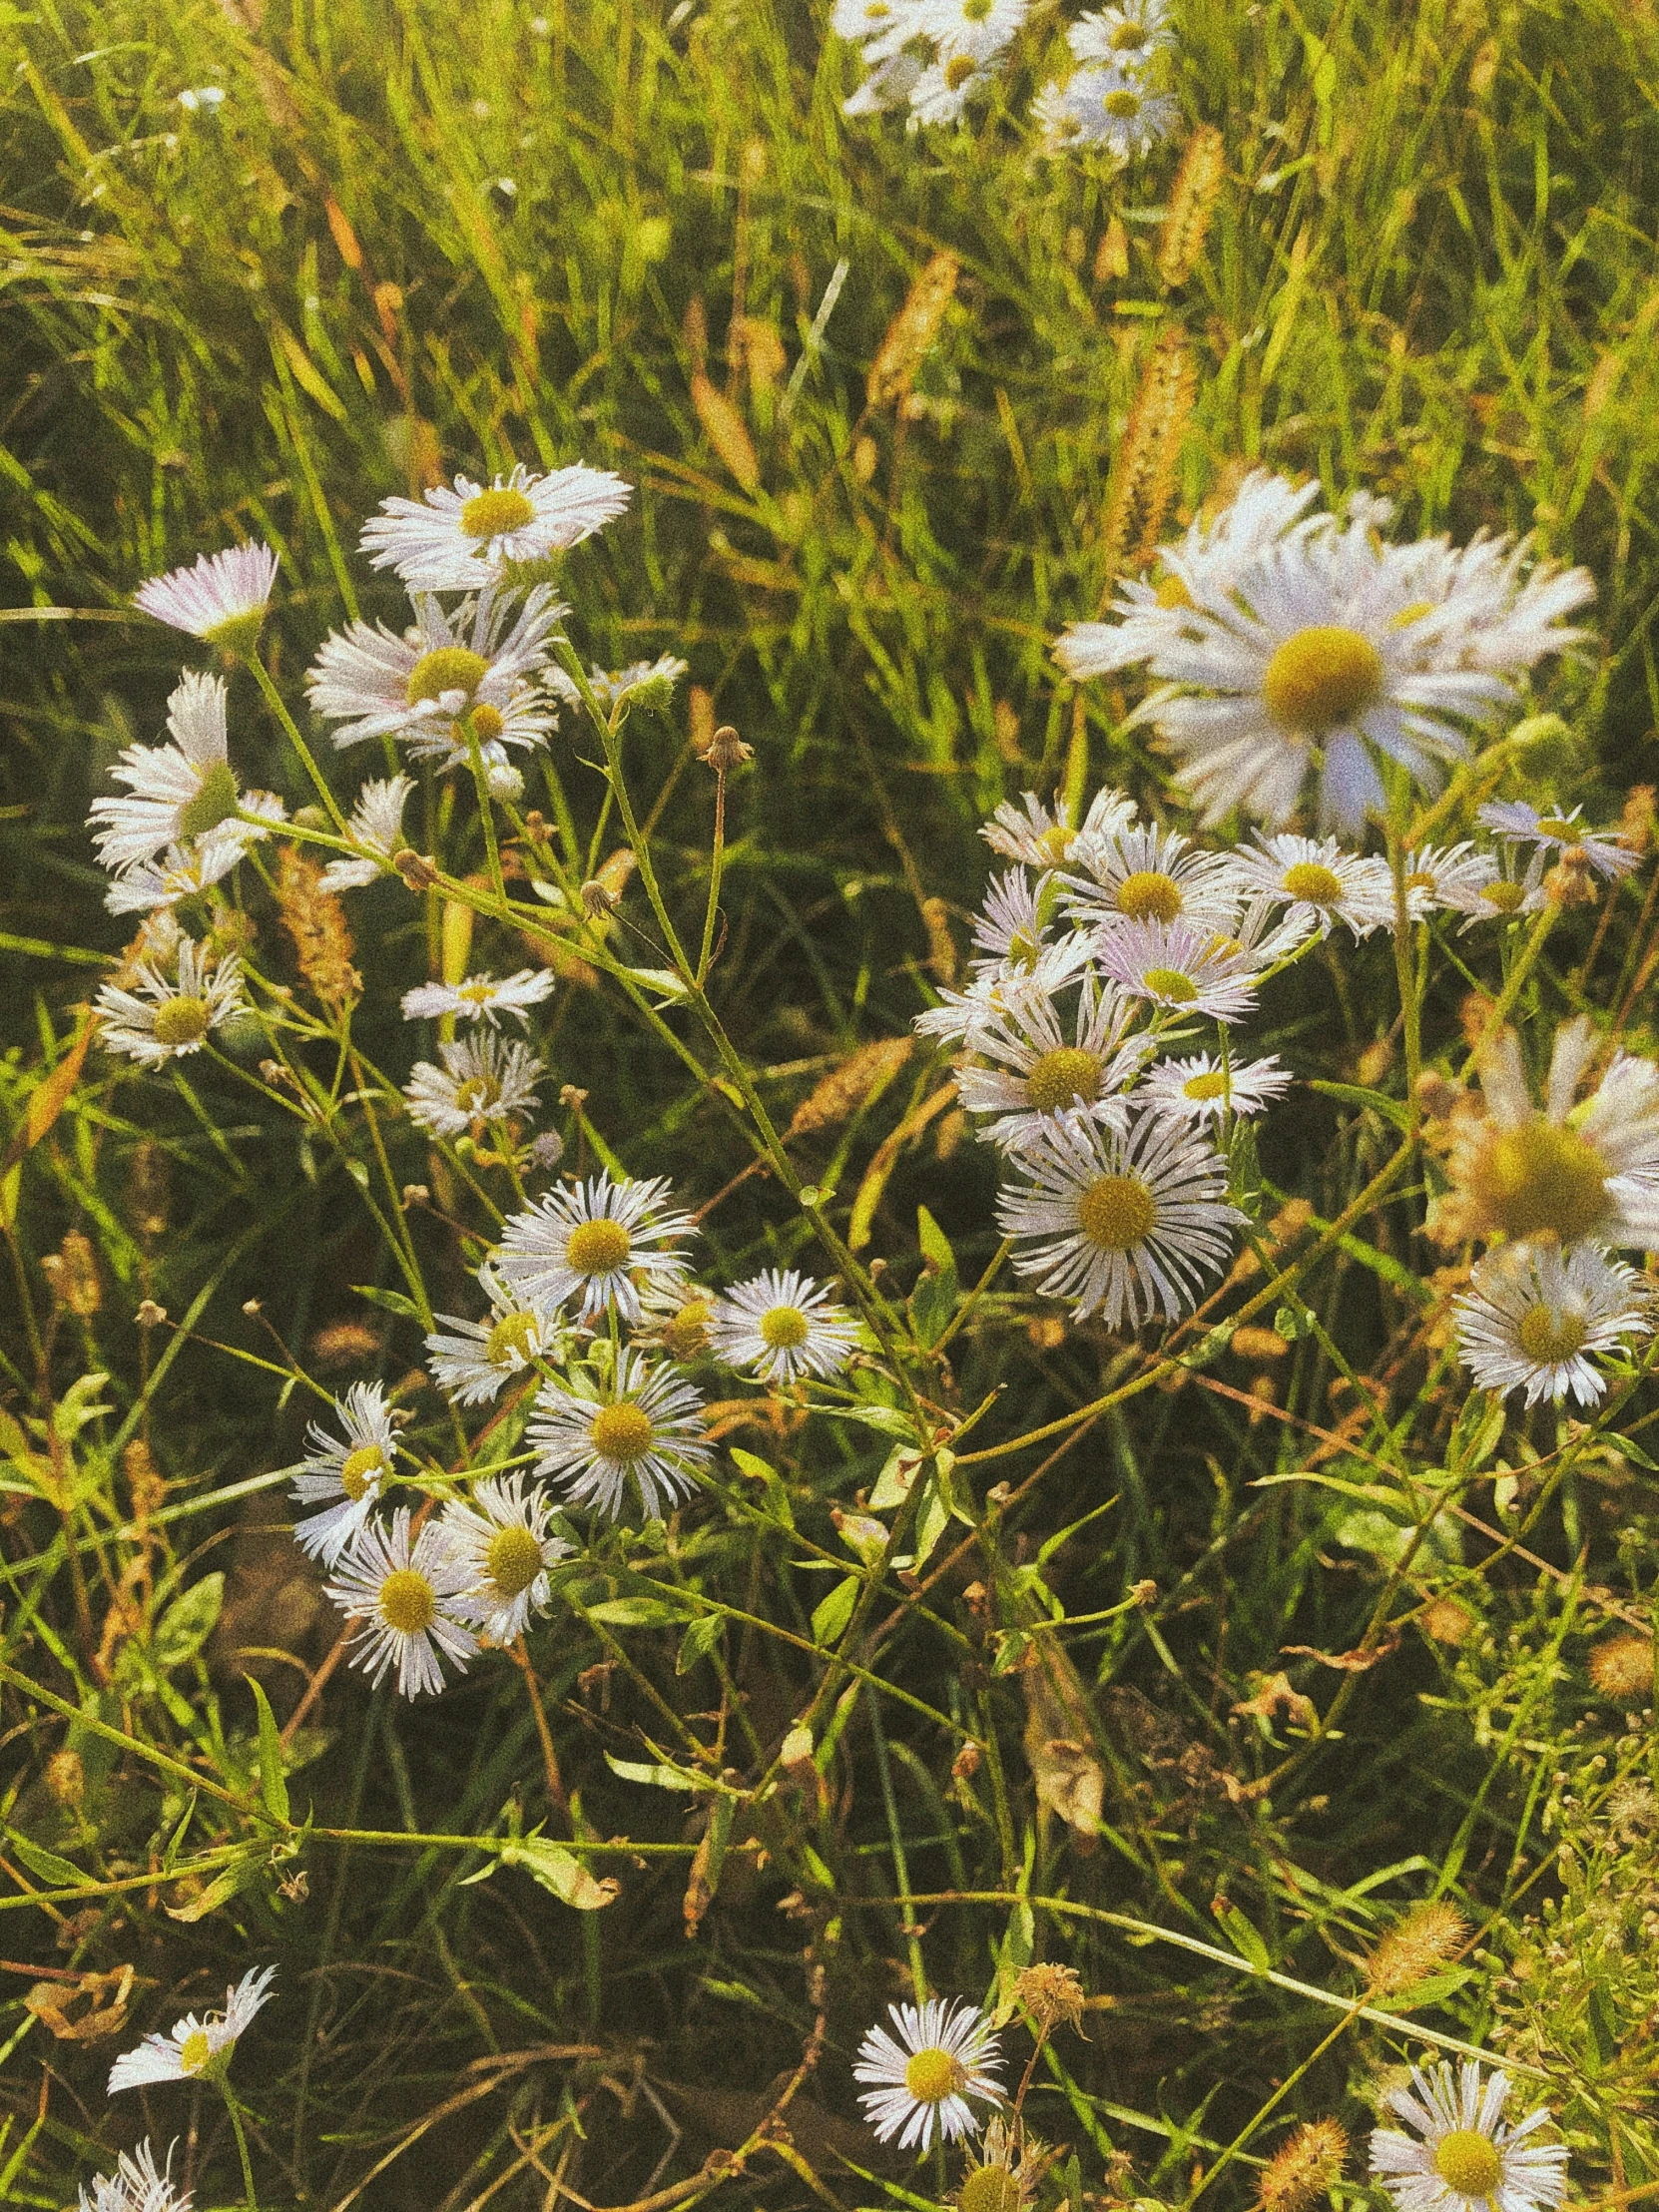 a group of white daisies in a field